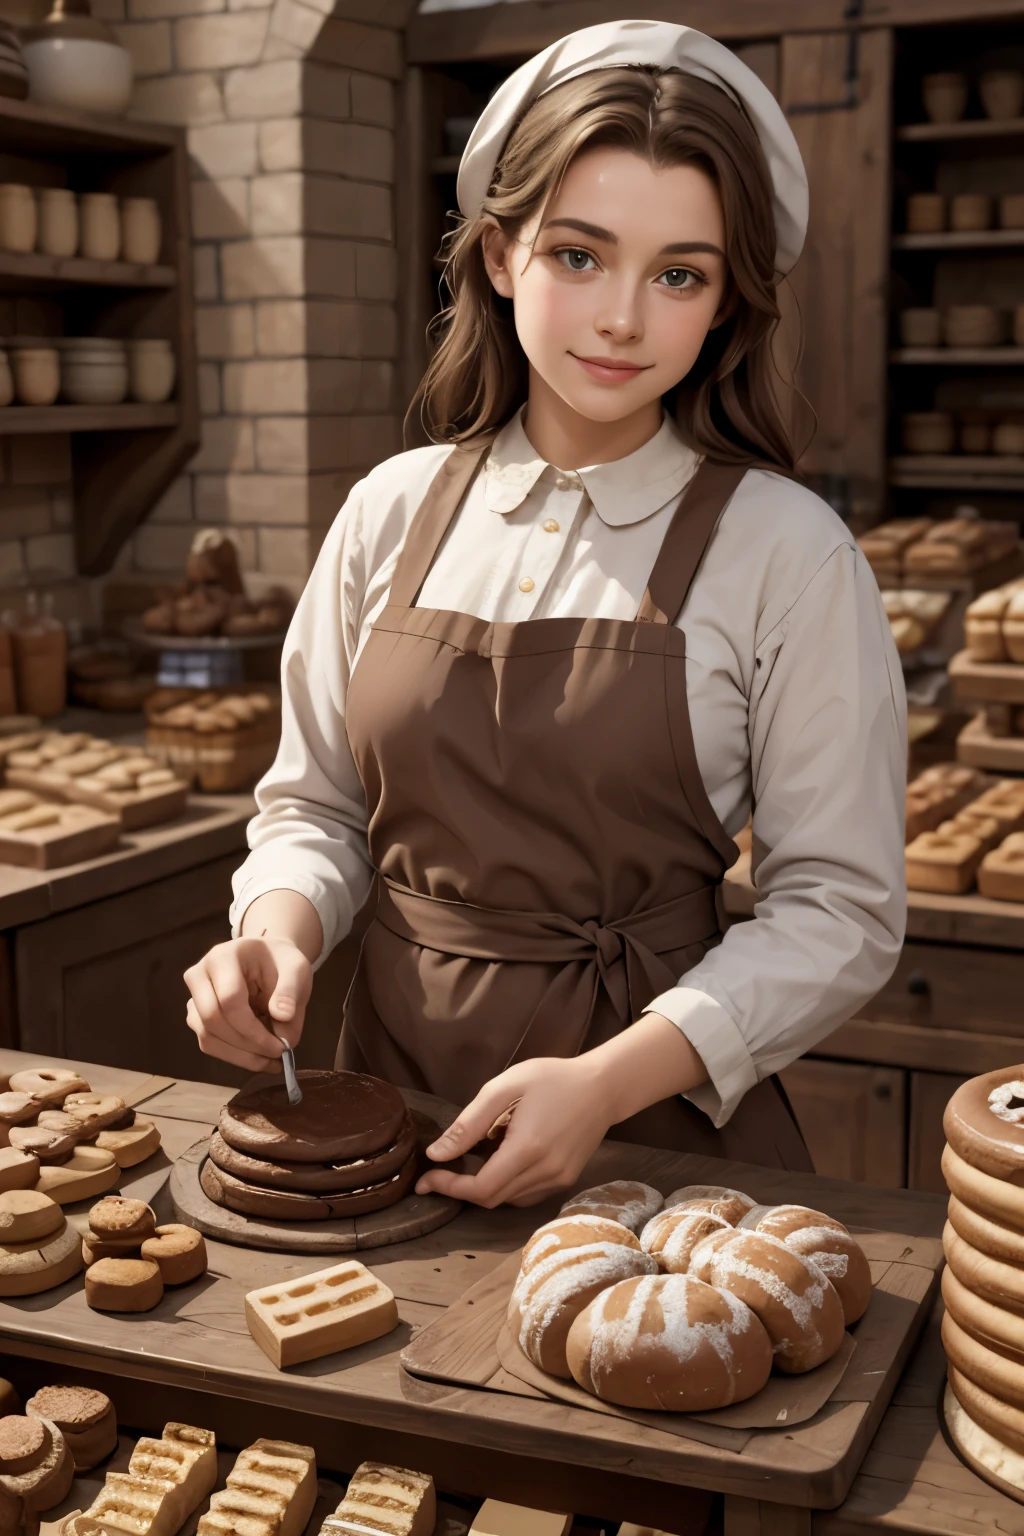 best quality, masterpiece,a baker's shop in a city in the early Middle Ages